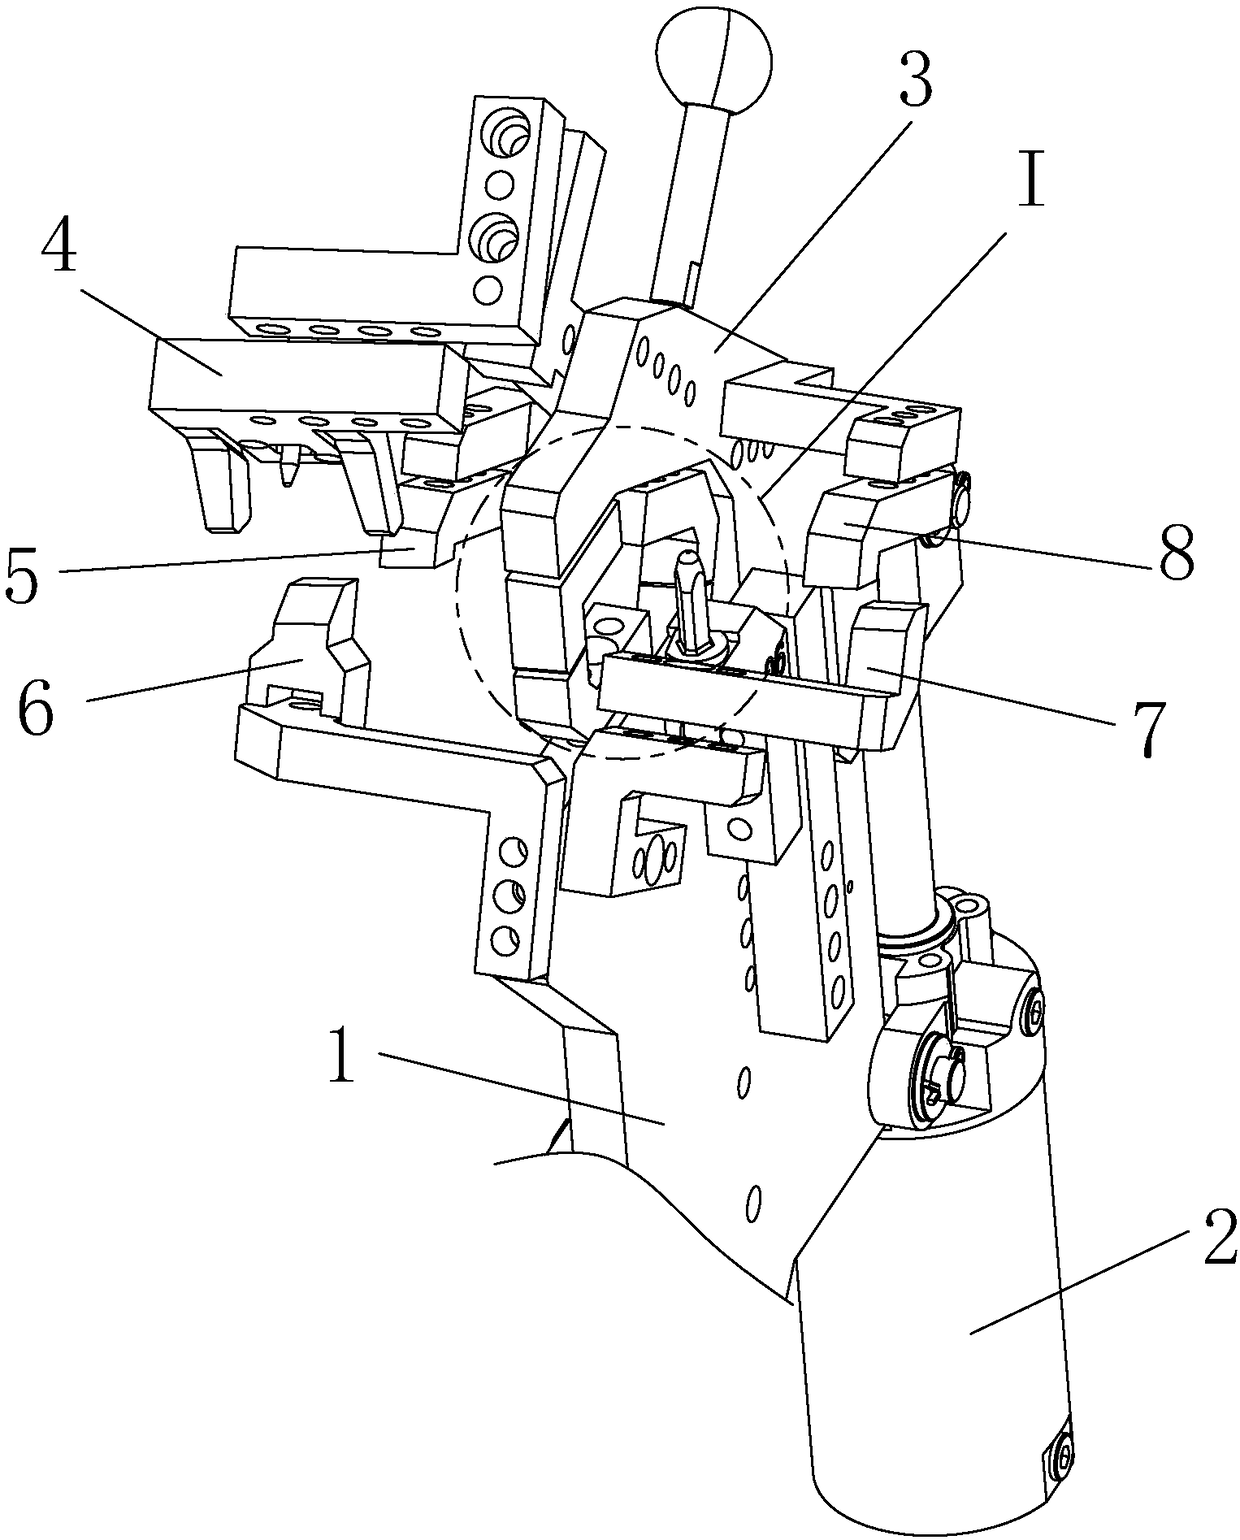 Middle positioning fixture for vehicle left and right side wall inner plate front assembly welding